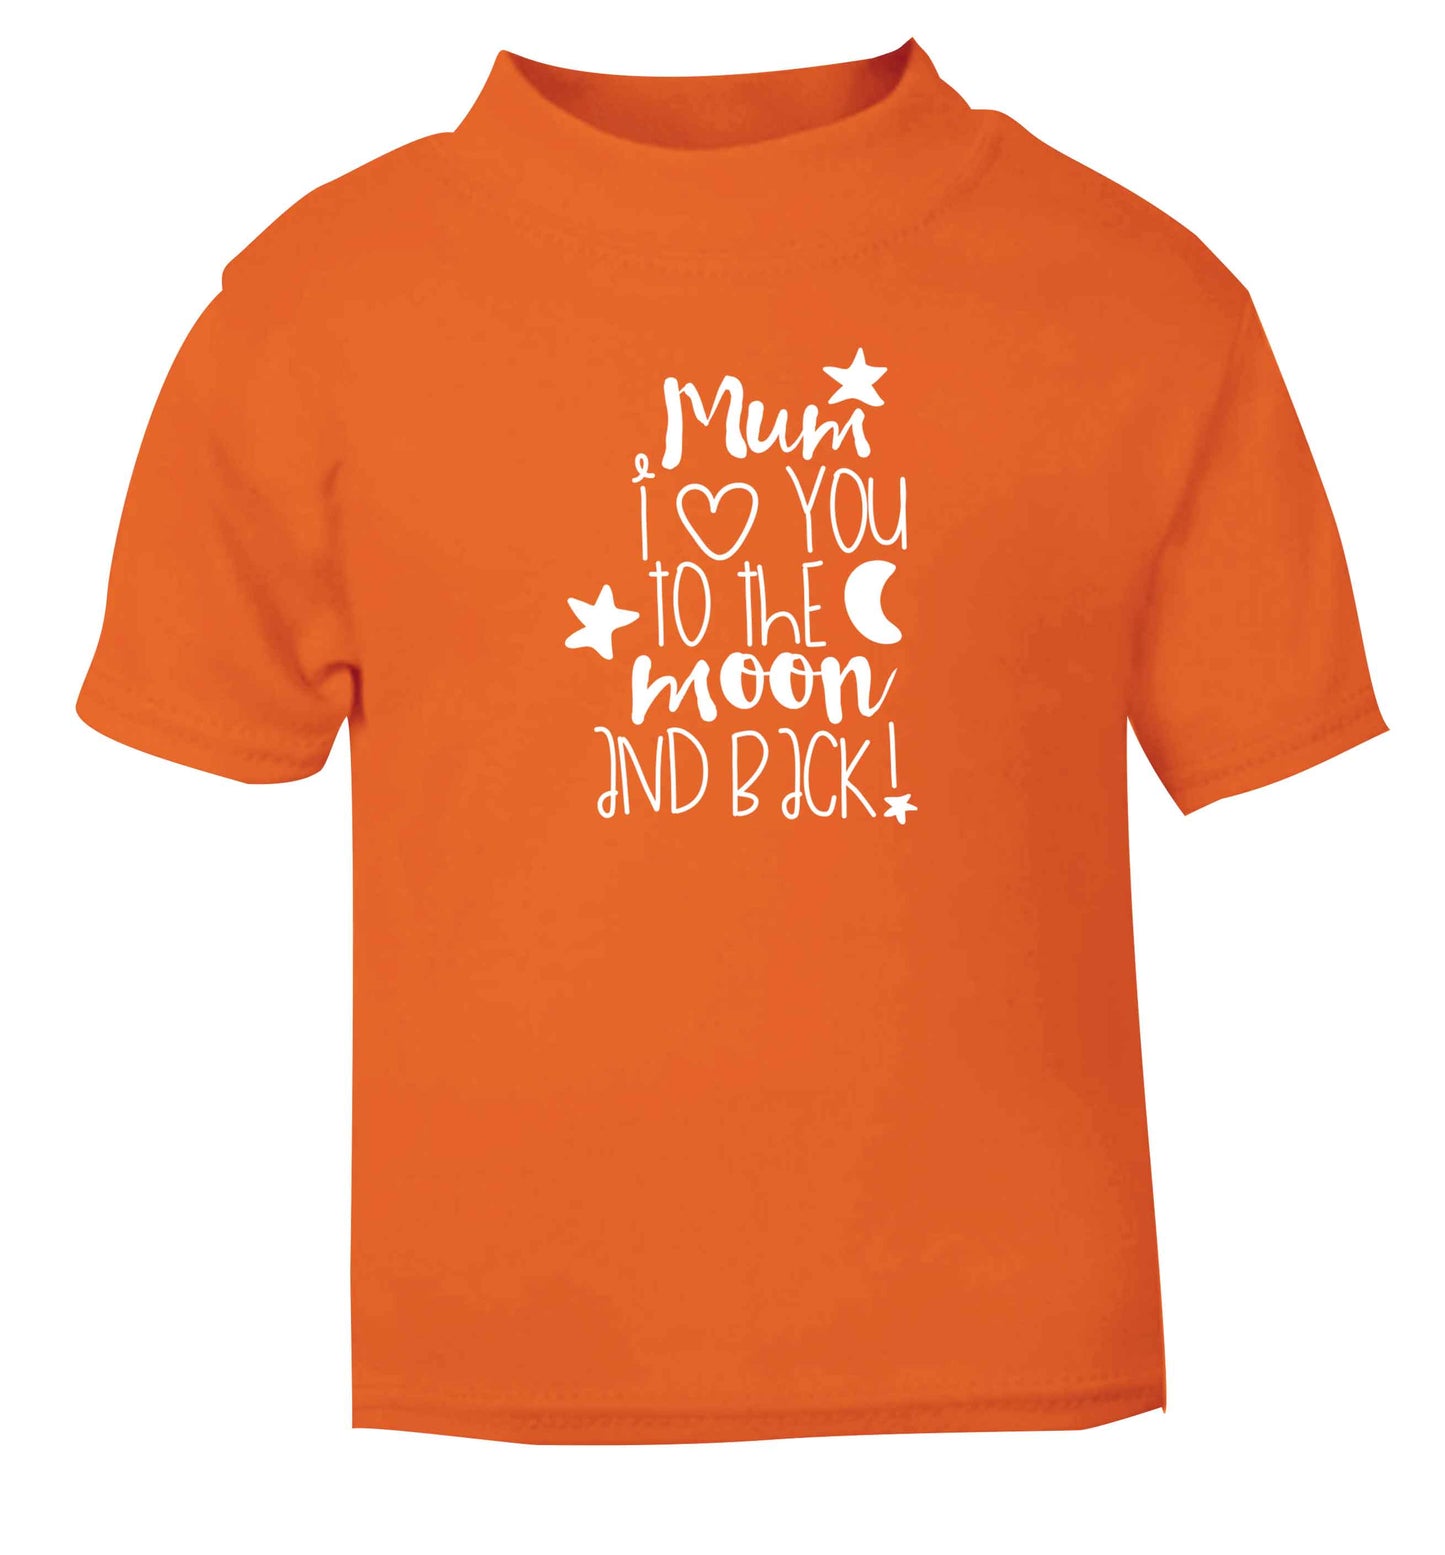 Mum I love you to the moon and back orange baby toddler Tshirt 2 Years